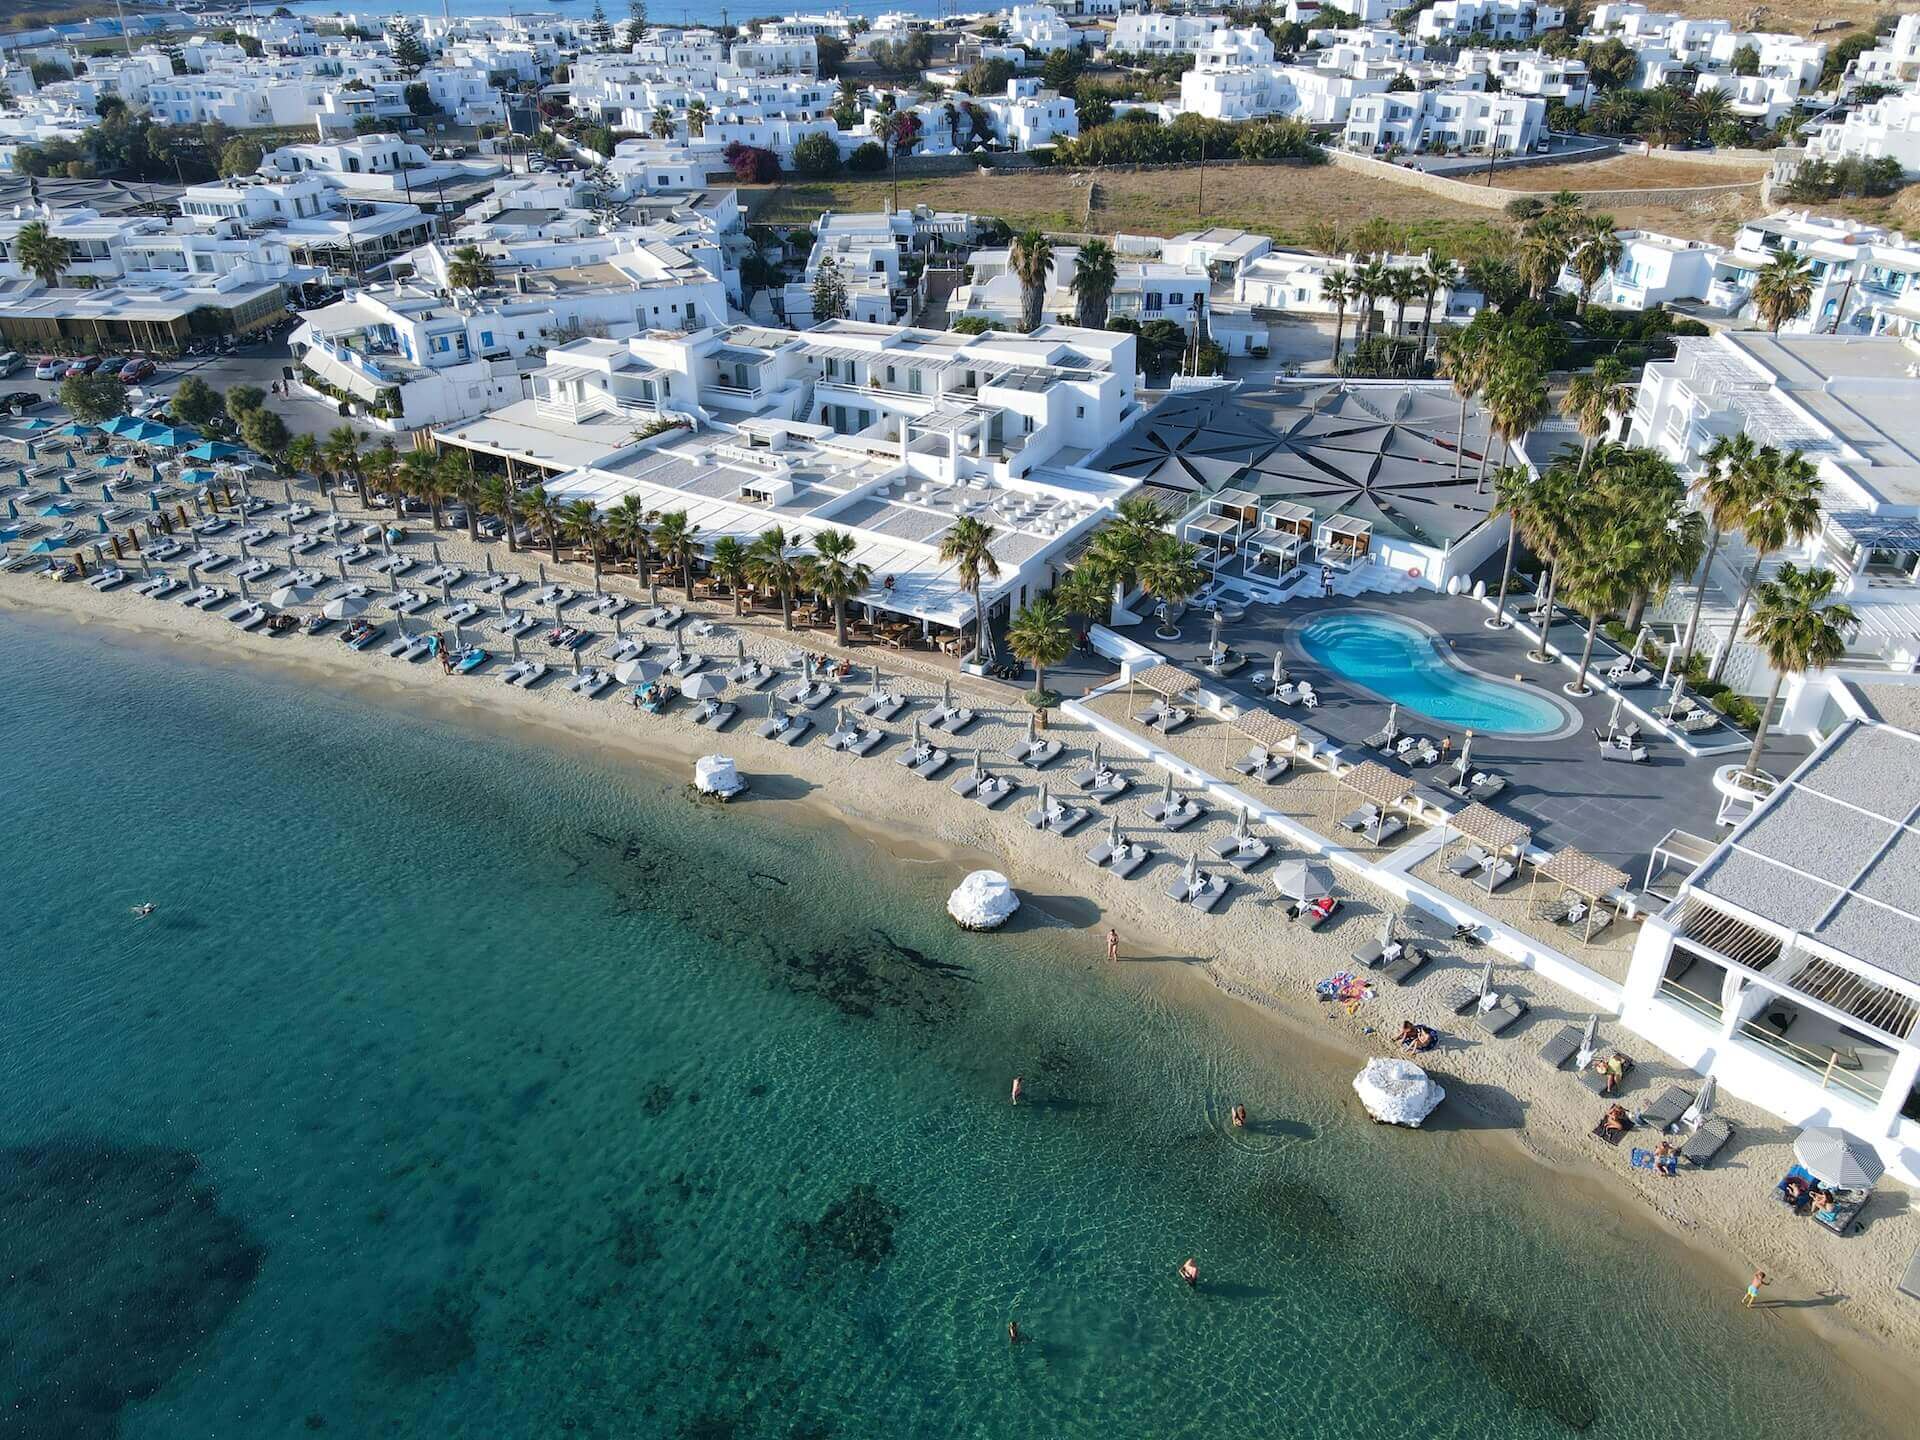 View of Ornos beach in Mykonos from air